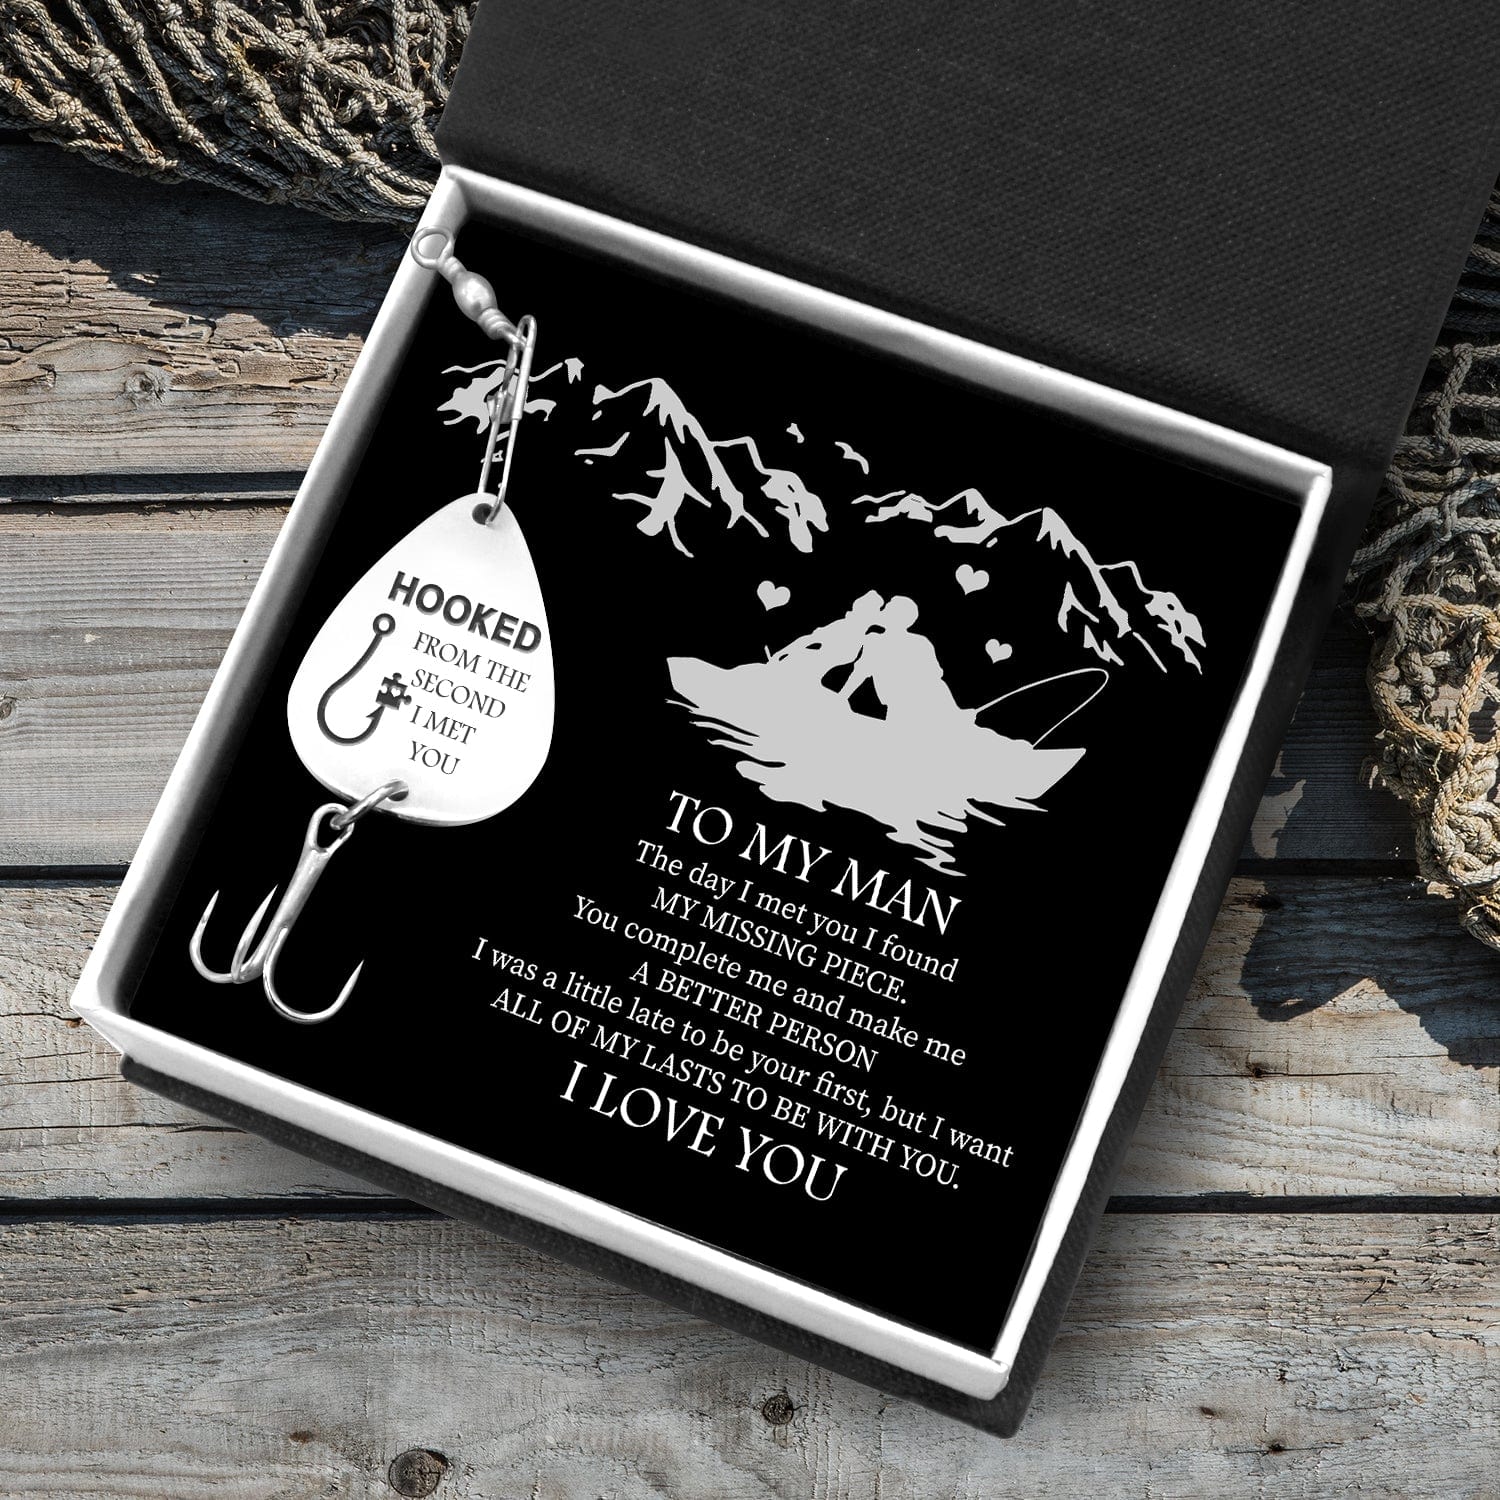  Just A Boy Who Loves Fishing: Cute Fishing Gifts For Boys:  Unique Fishing Lovers Notebook Personalized Gag Gift Ideas For Son Brother  Men Boyfriend - Perfect Blank Lined Journal For Writing